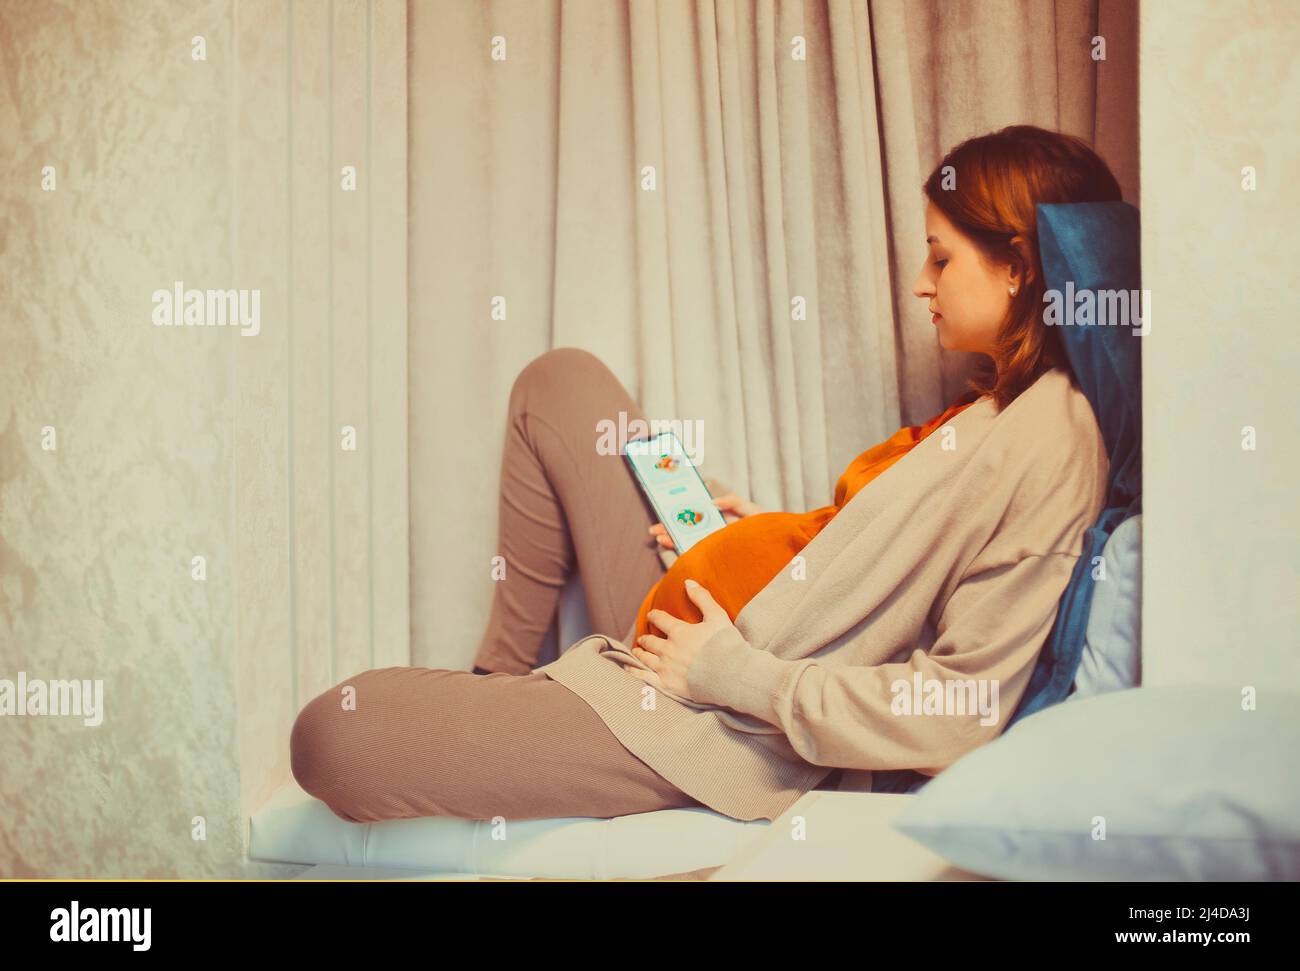 Pregnant woman holding smartphone using pregnancy tracker app on mobile phone while sitting indoors, expectant mother tracking baby development in mob Stock Photo